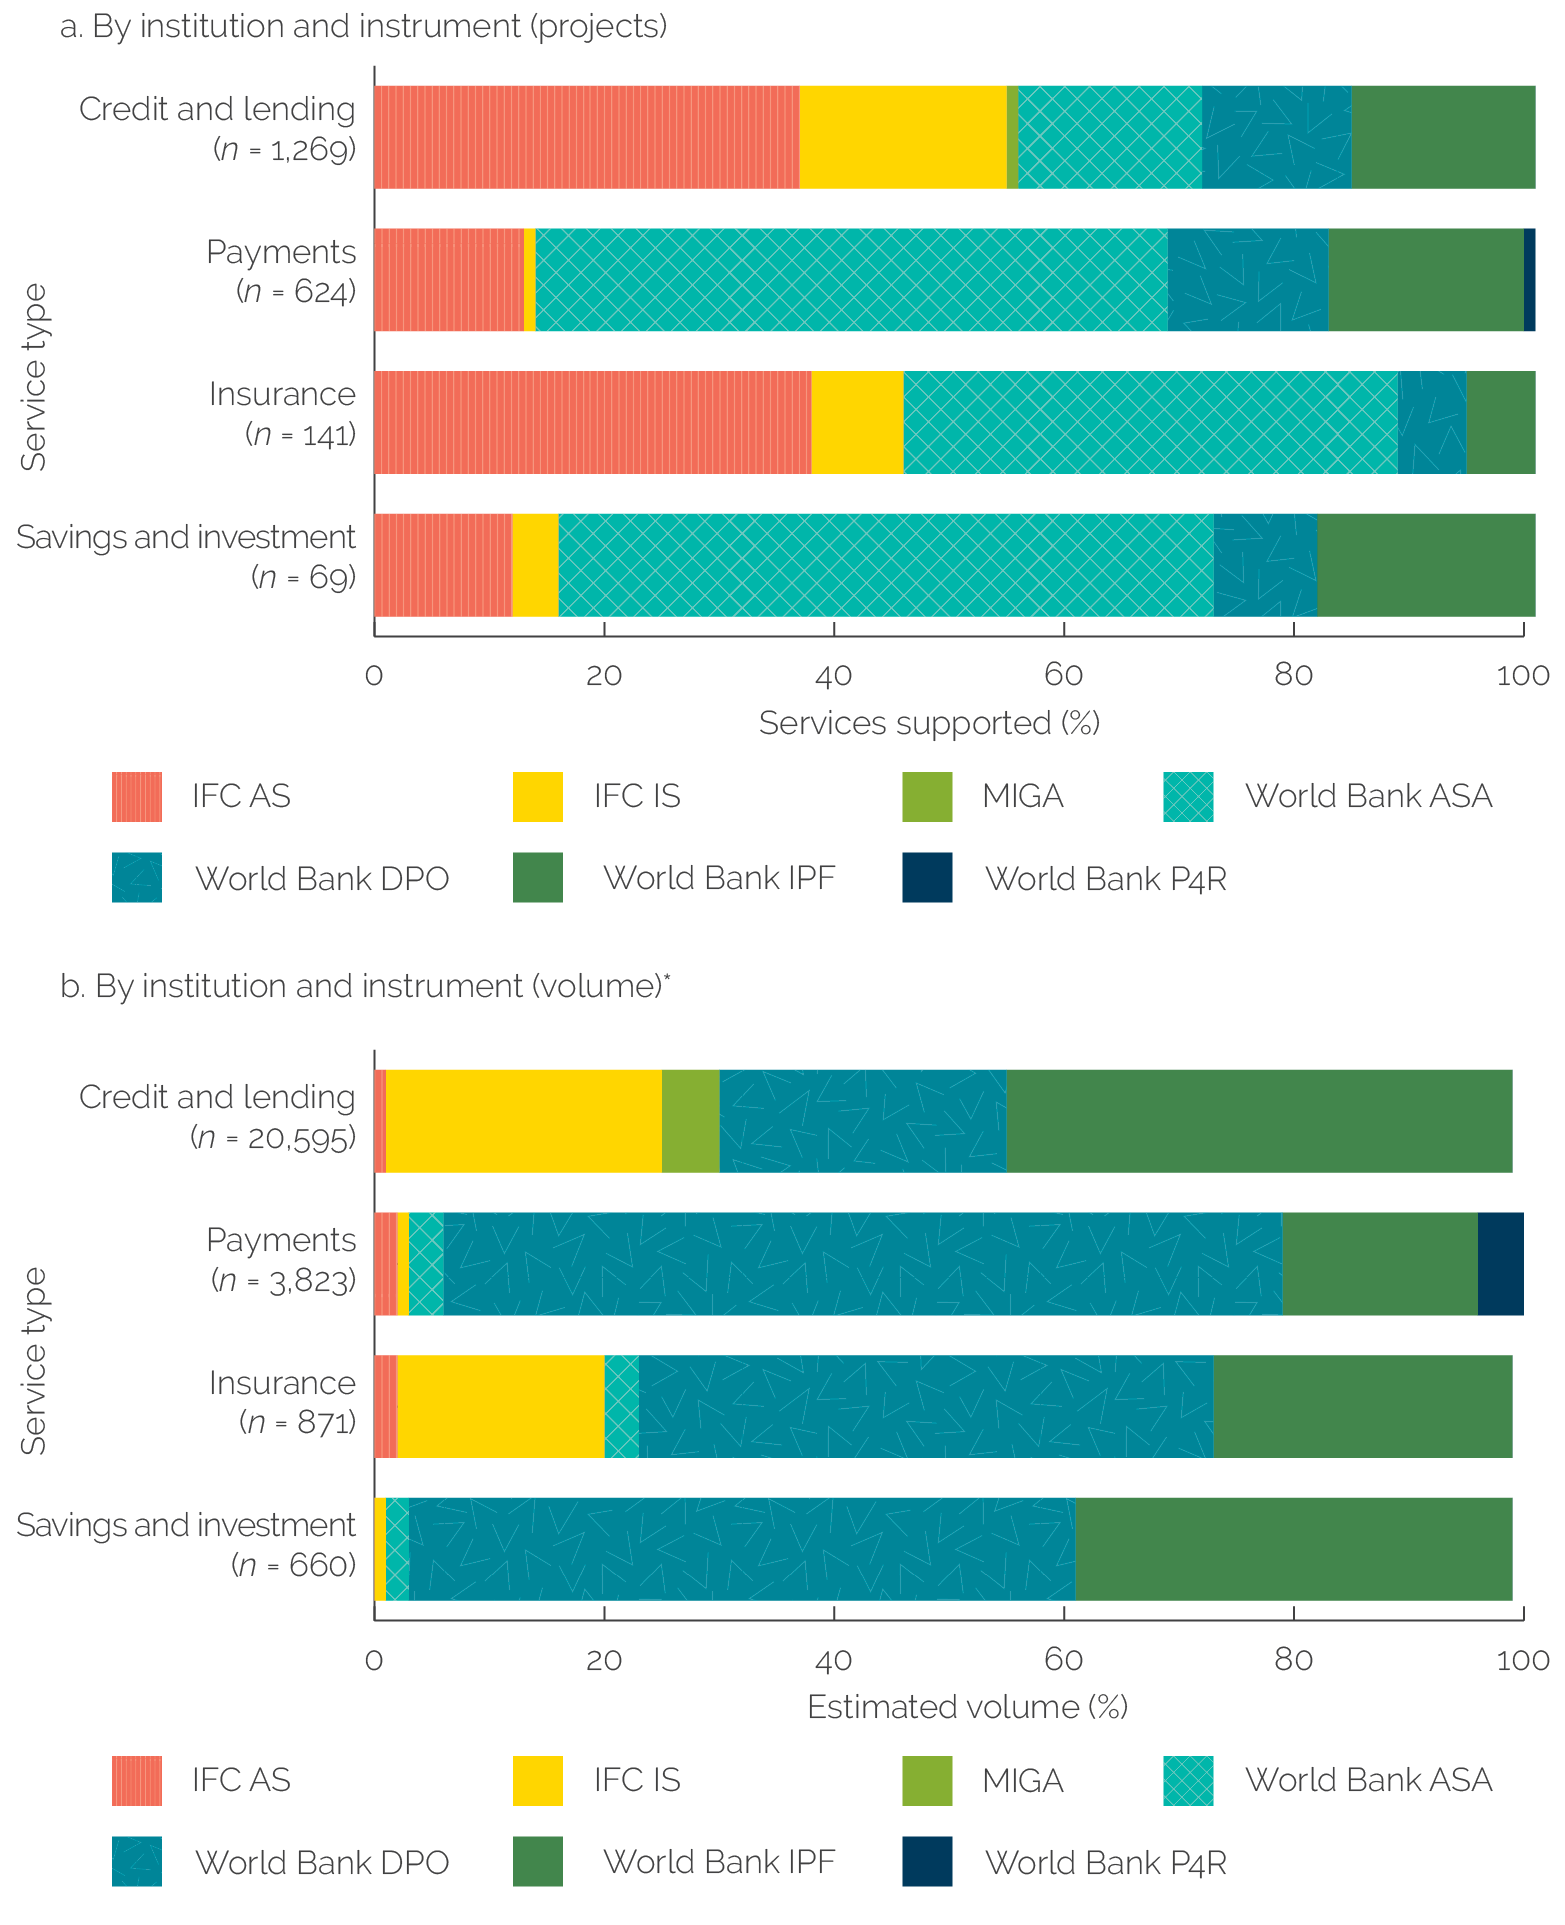 In panel A, a 100% stacked bar graphs show that, by number of projects, World Bank A S A supported payments, insurance, and savings services the most, and I F C Advisory supported insurance and credit services the most. Highest commitment volume came from World Bank financing and IFC investment services. In panel B, a 100% stacked bar graph shows that, by commitment valure, most of portfolio was led by World Bank financing and IFC investment services.